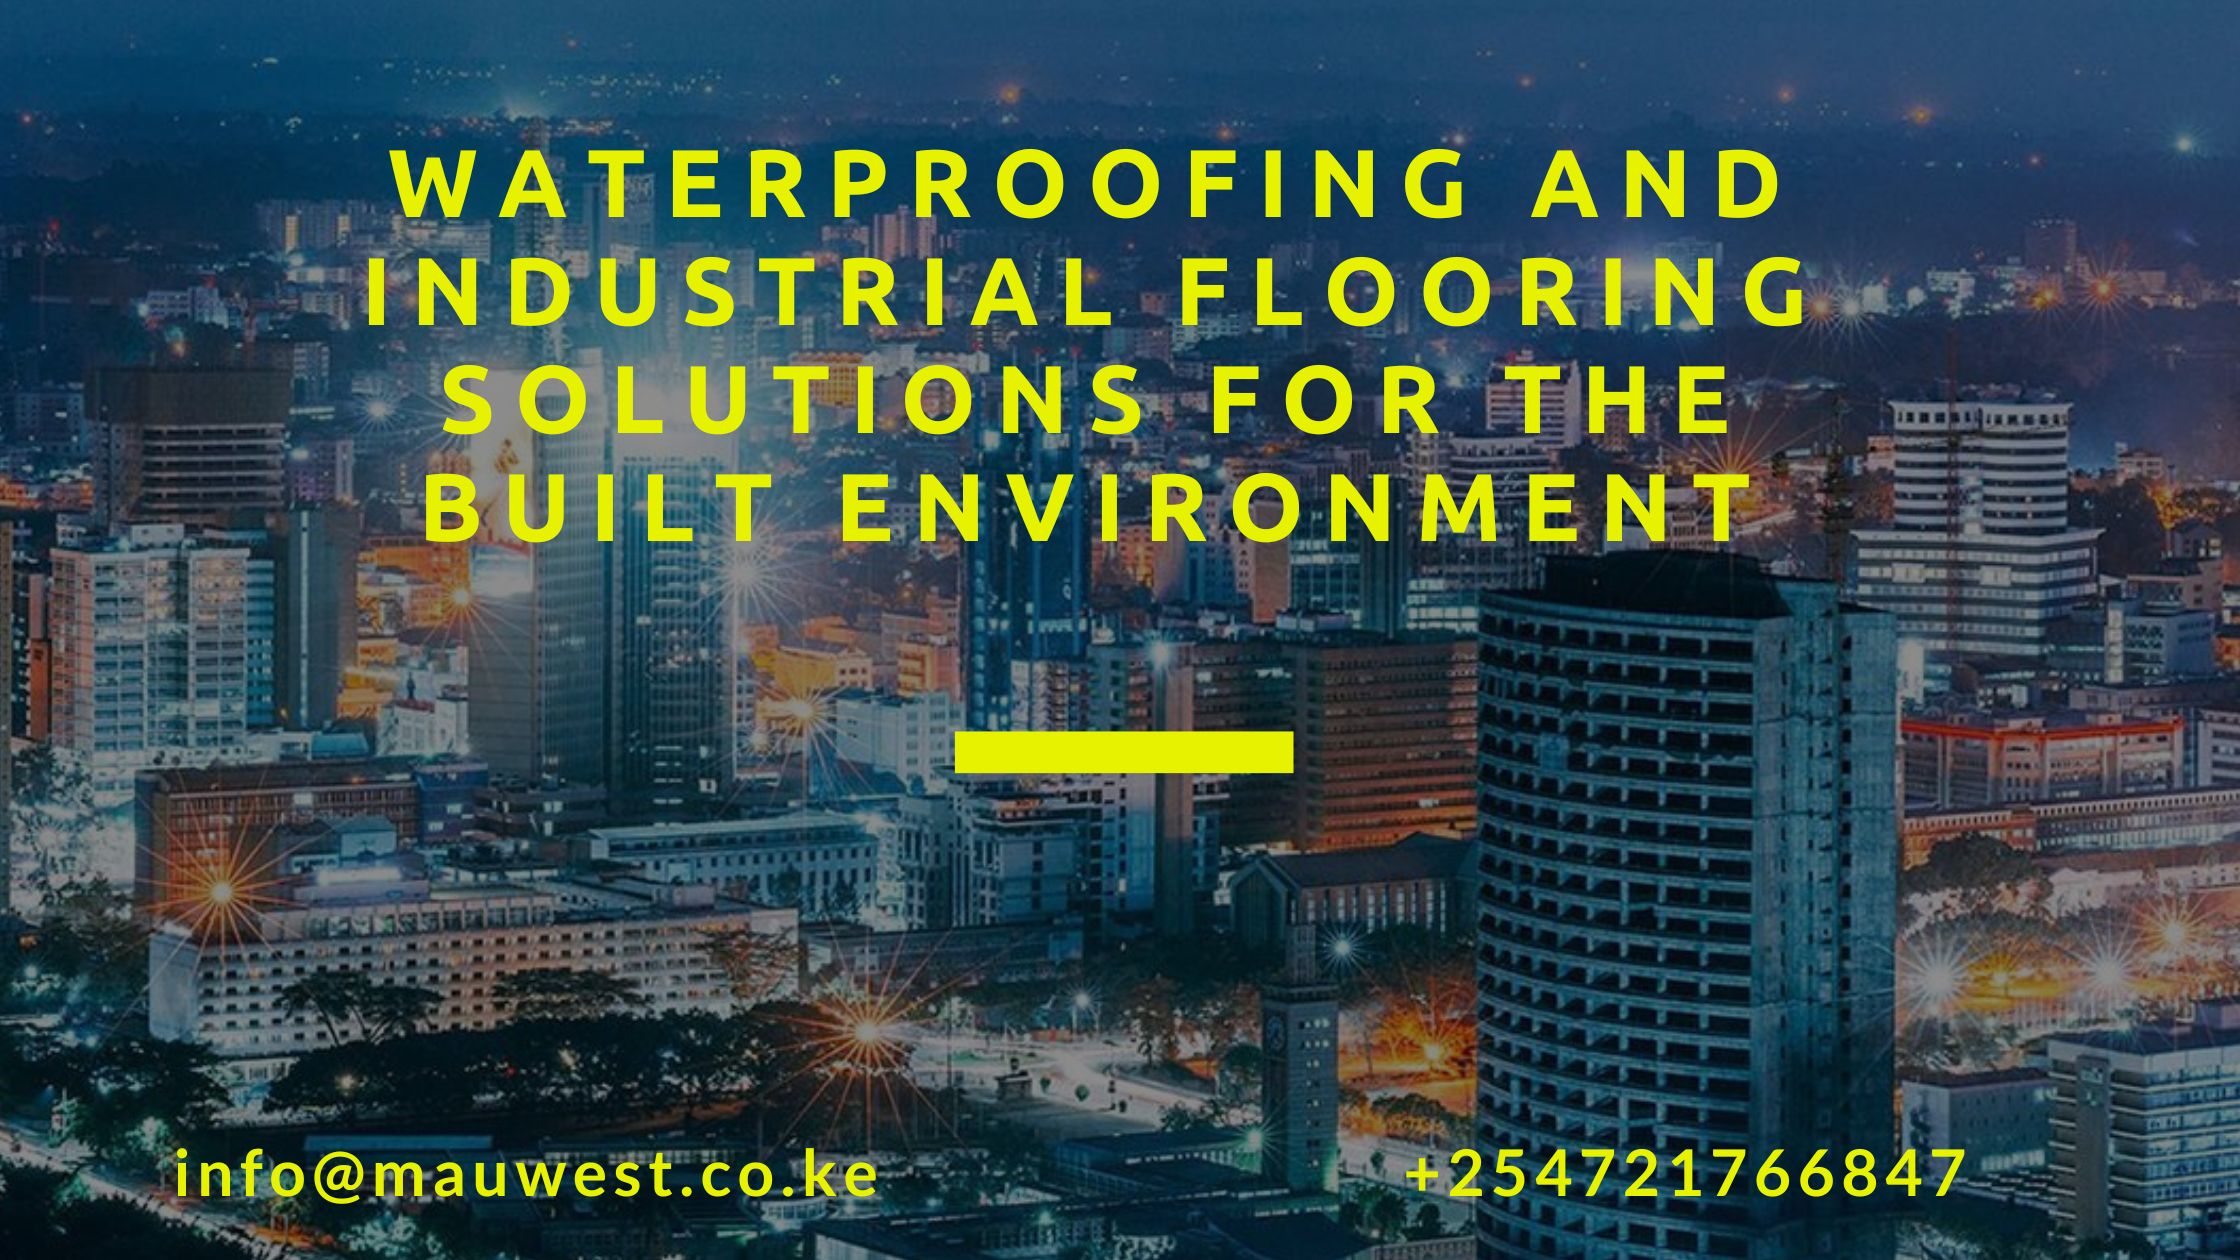 waterproofing and industrial flooring solutions to the built environment